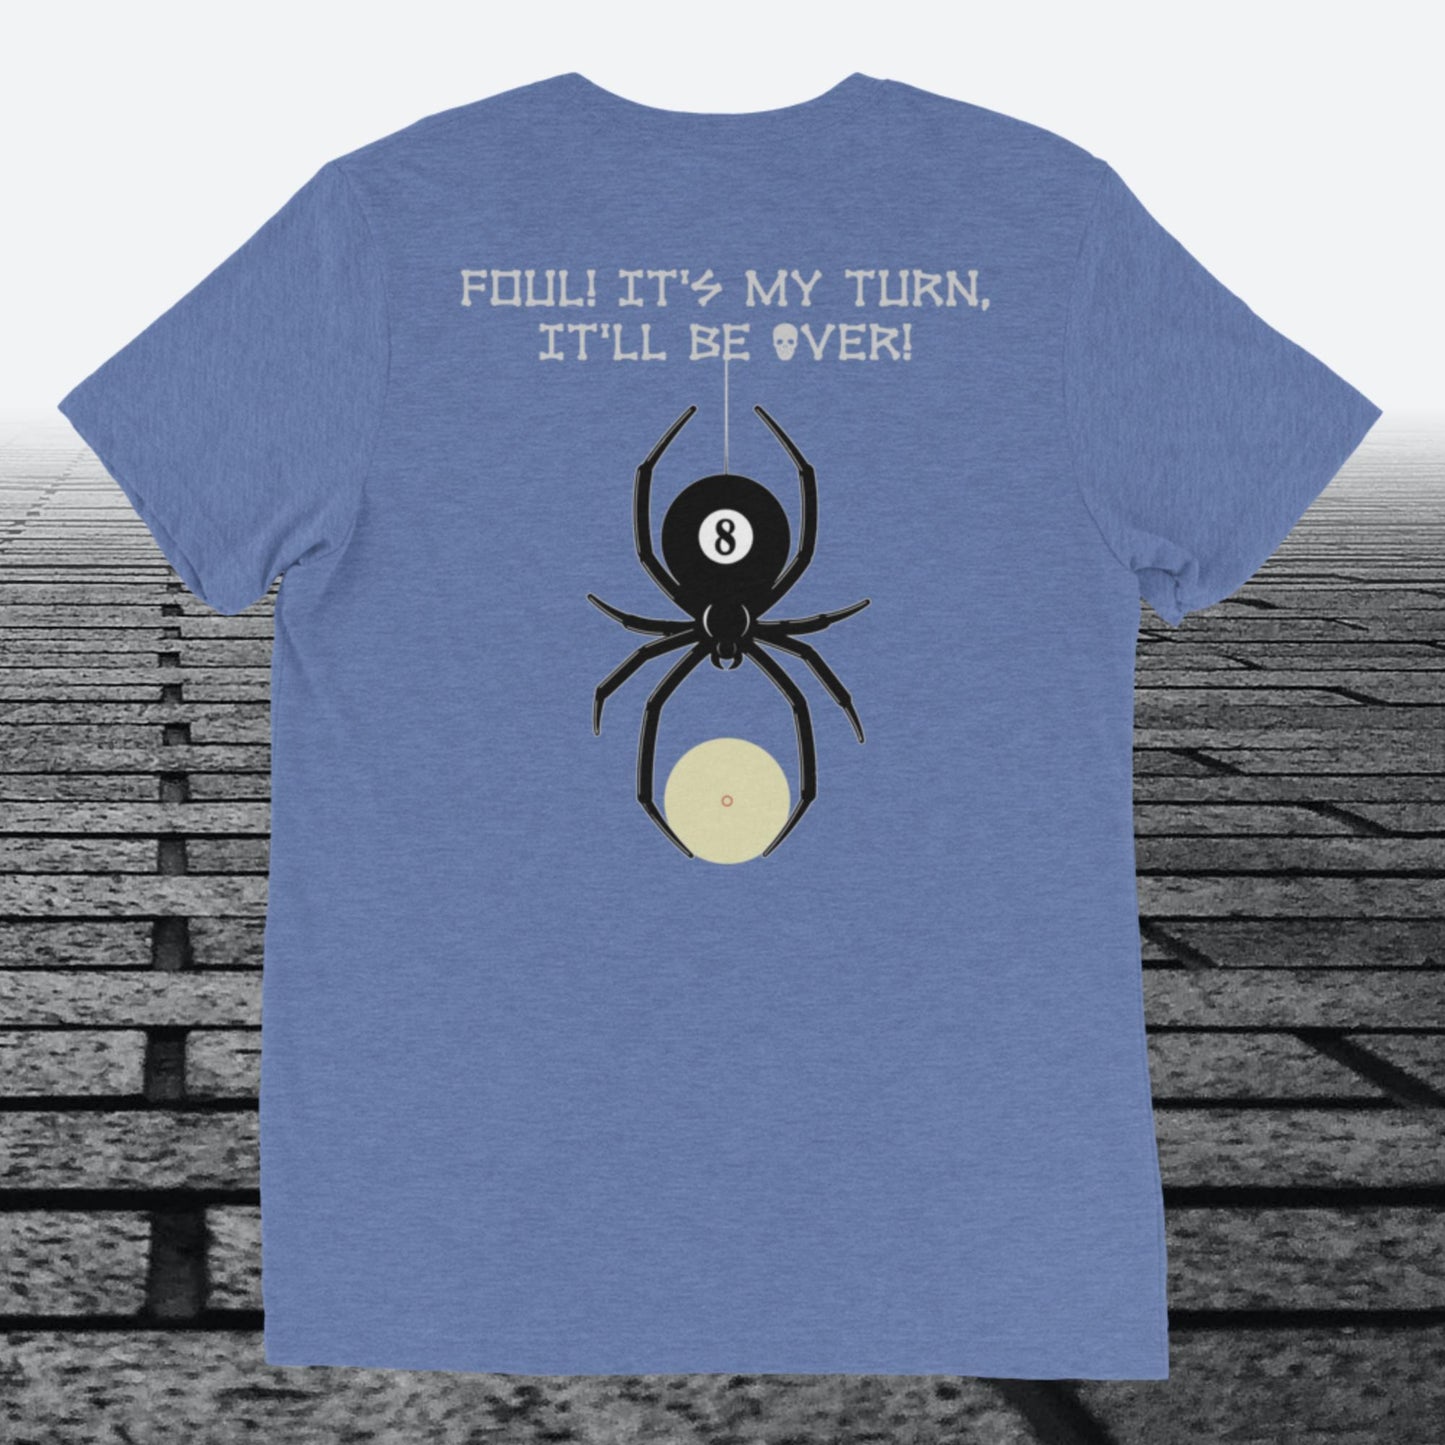 Foul, It's my turn, It'll be over, with logo on the front, Tri-blend t-shirt